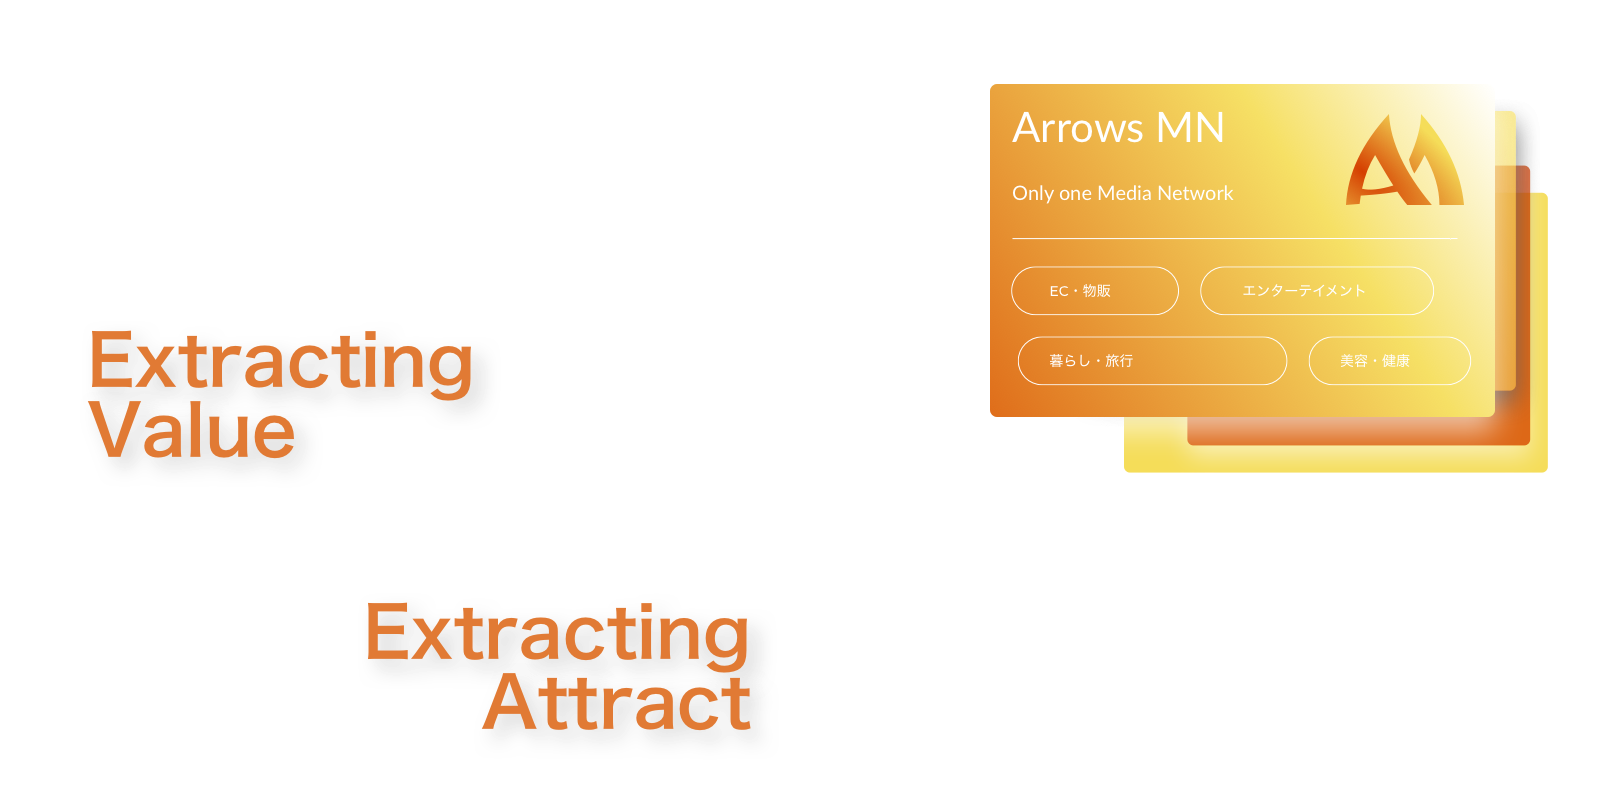 about_arrows_card1